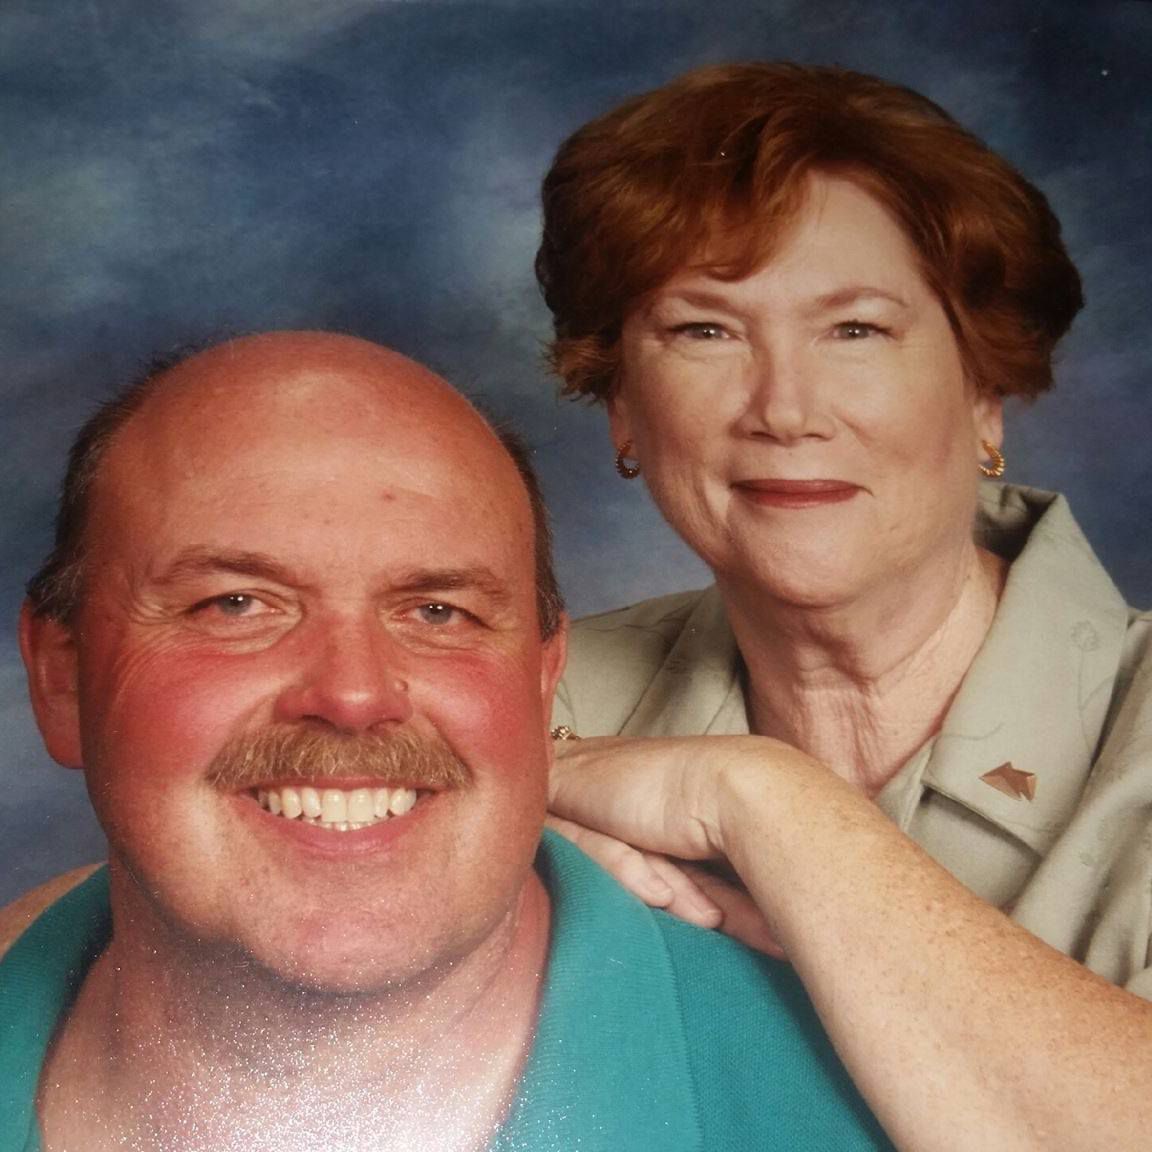 Joe and Kathy Watts have been married 44 years. She took care of his mother, who had dementia, for several years. They are starting to consider what kind of caregiver challenges they might face in the future themselves.